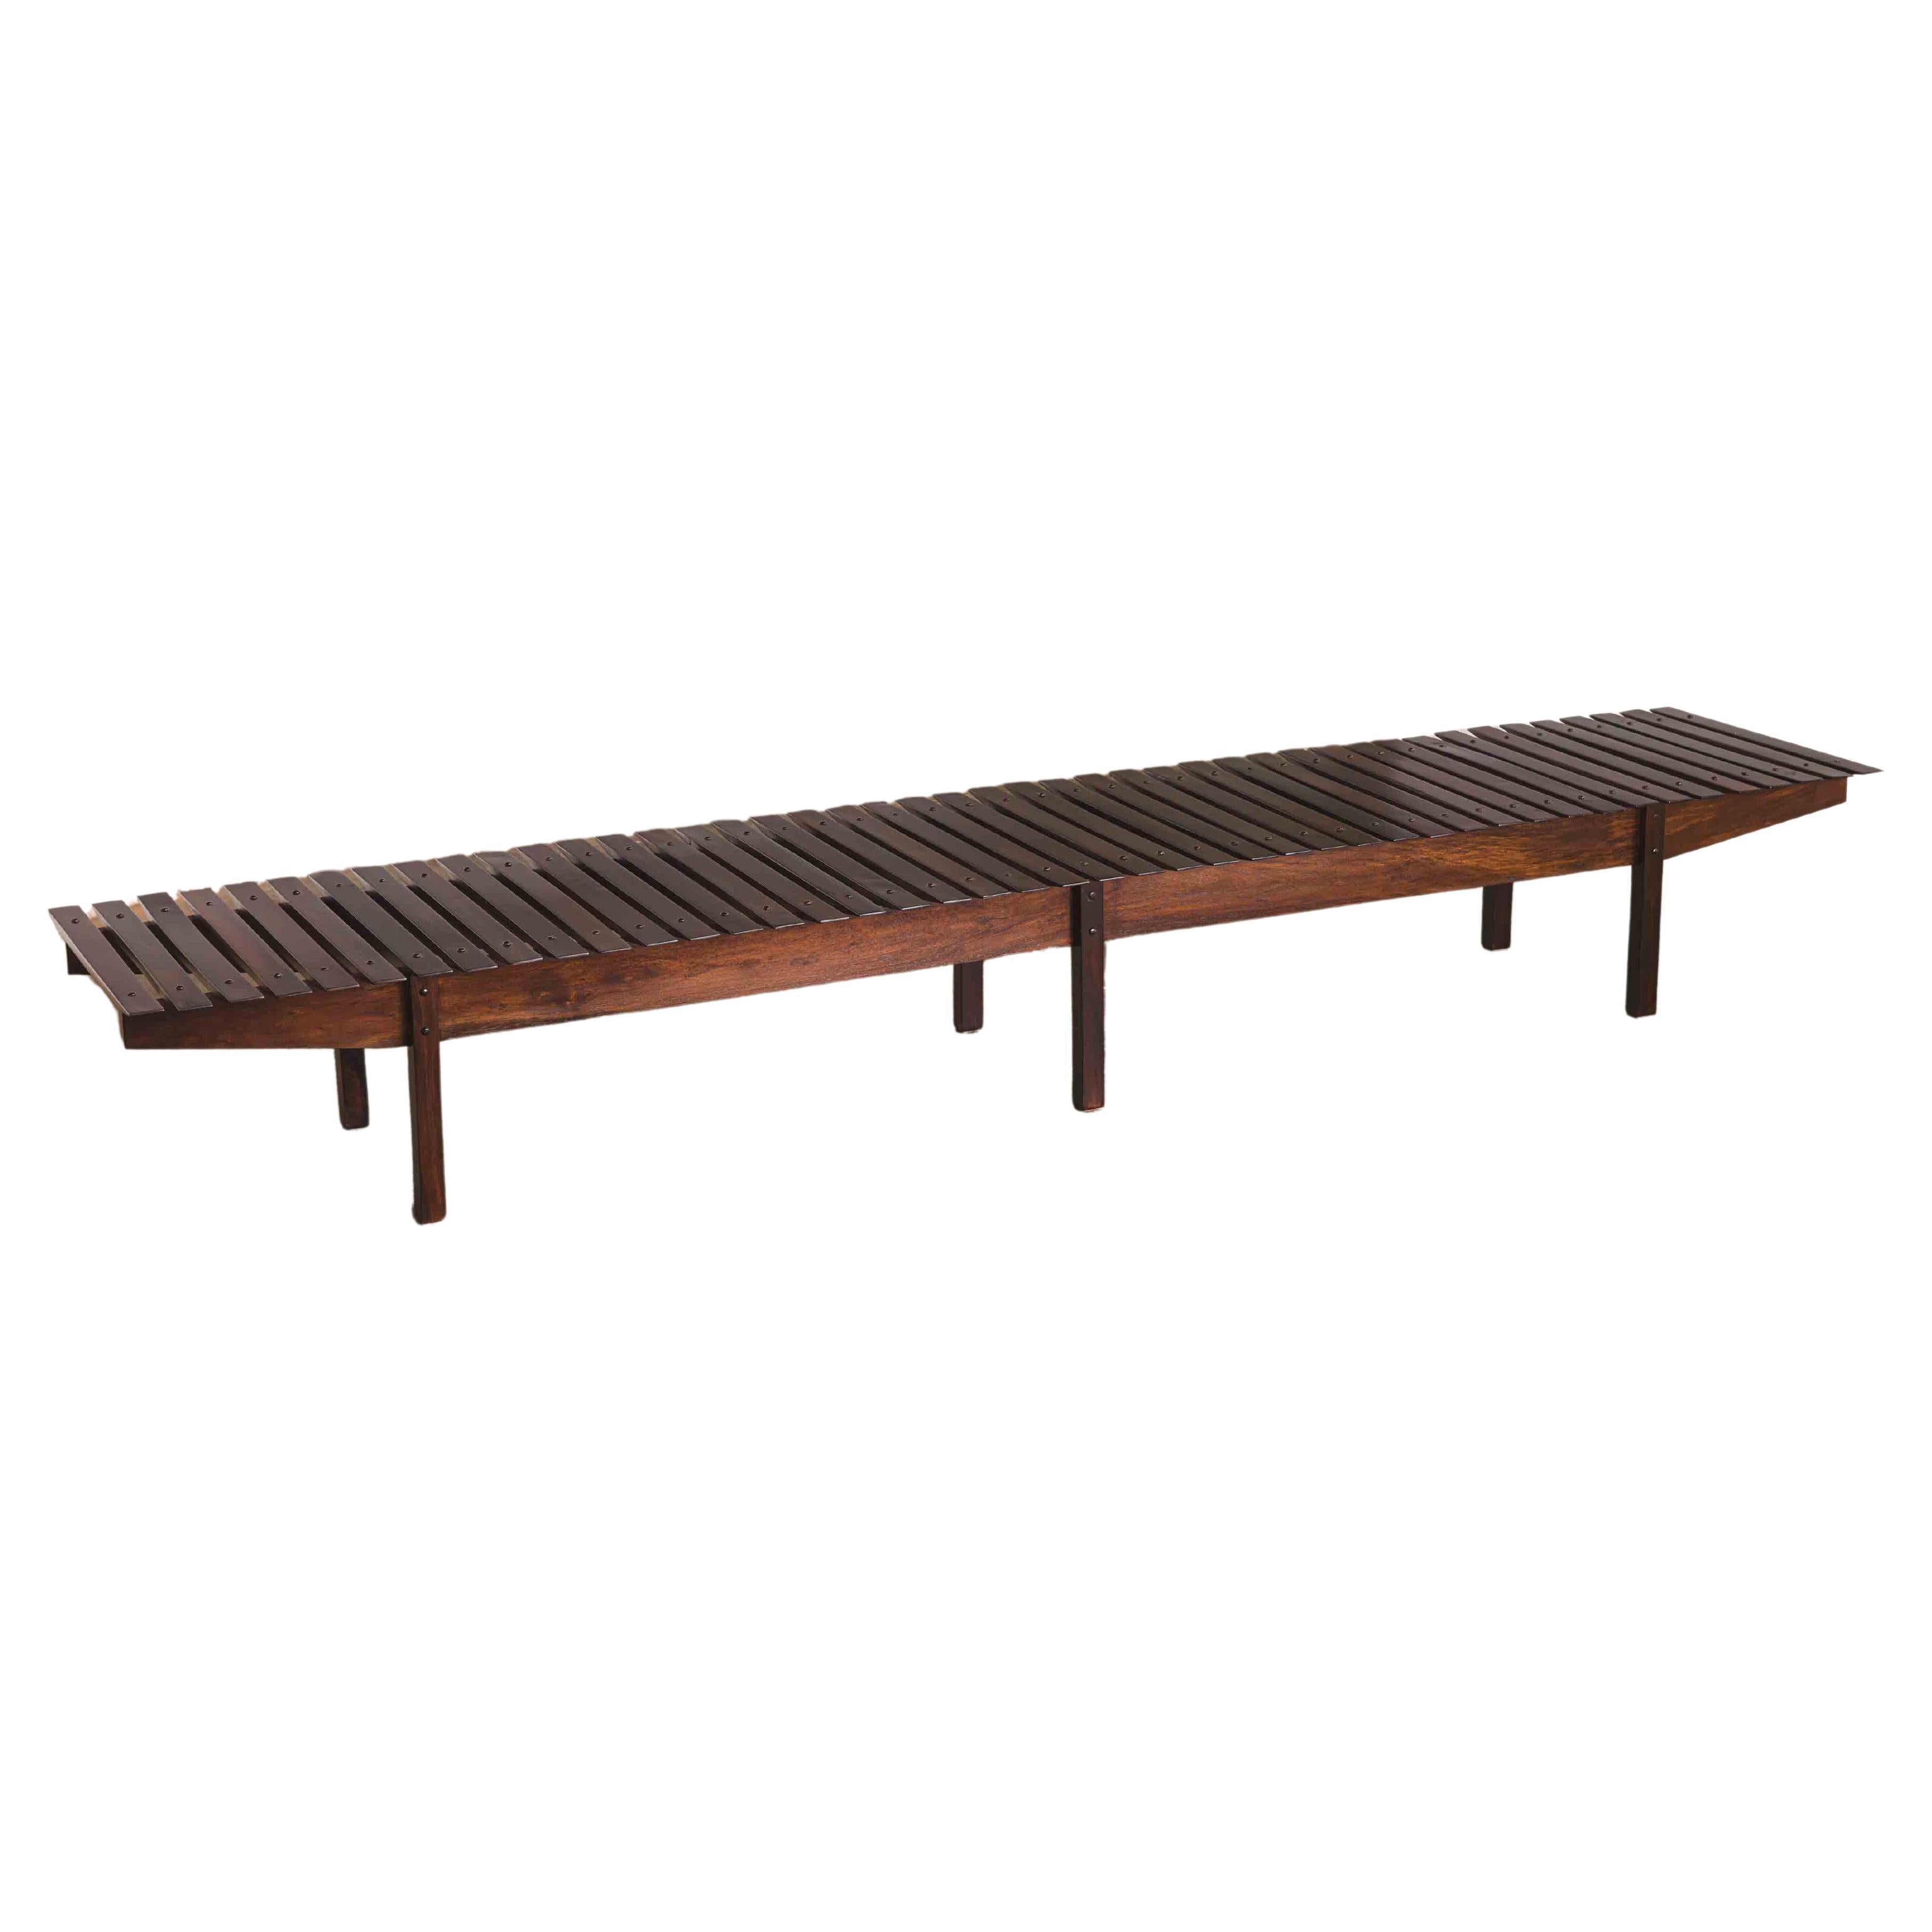 "Mucki" bench by Sergio Rodrigues For Sale